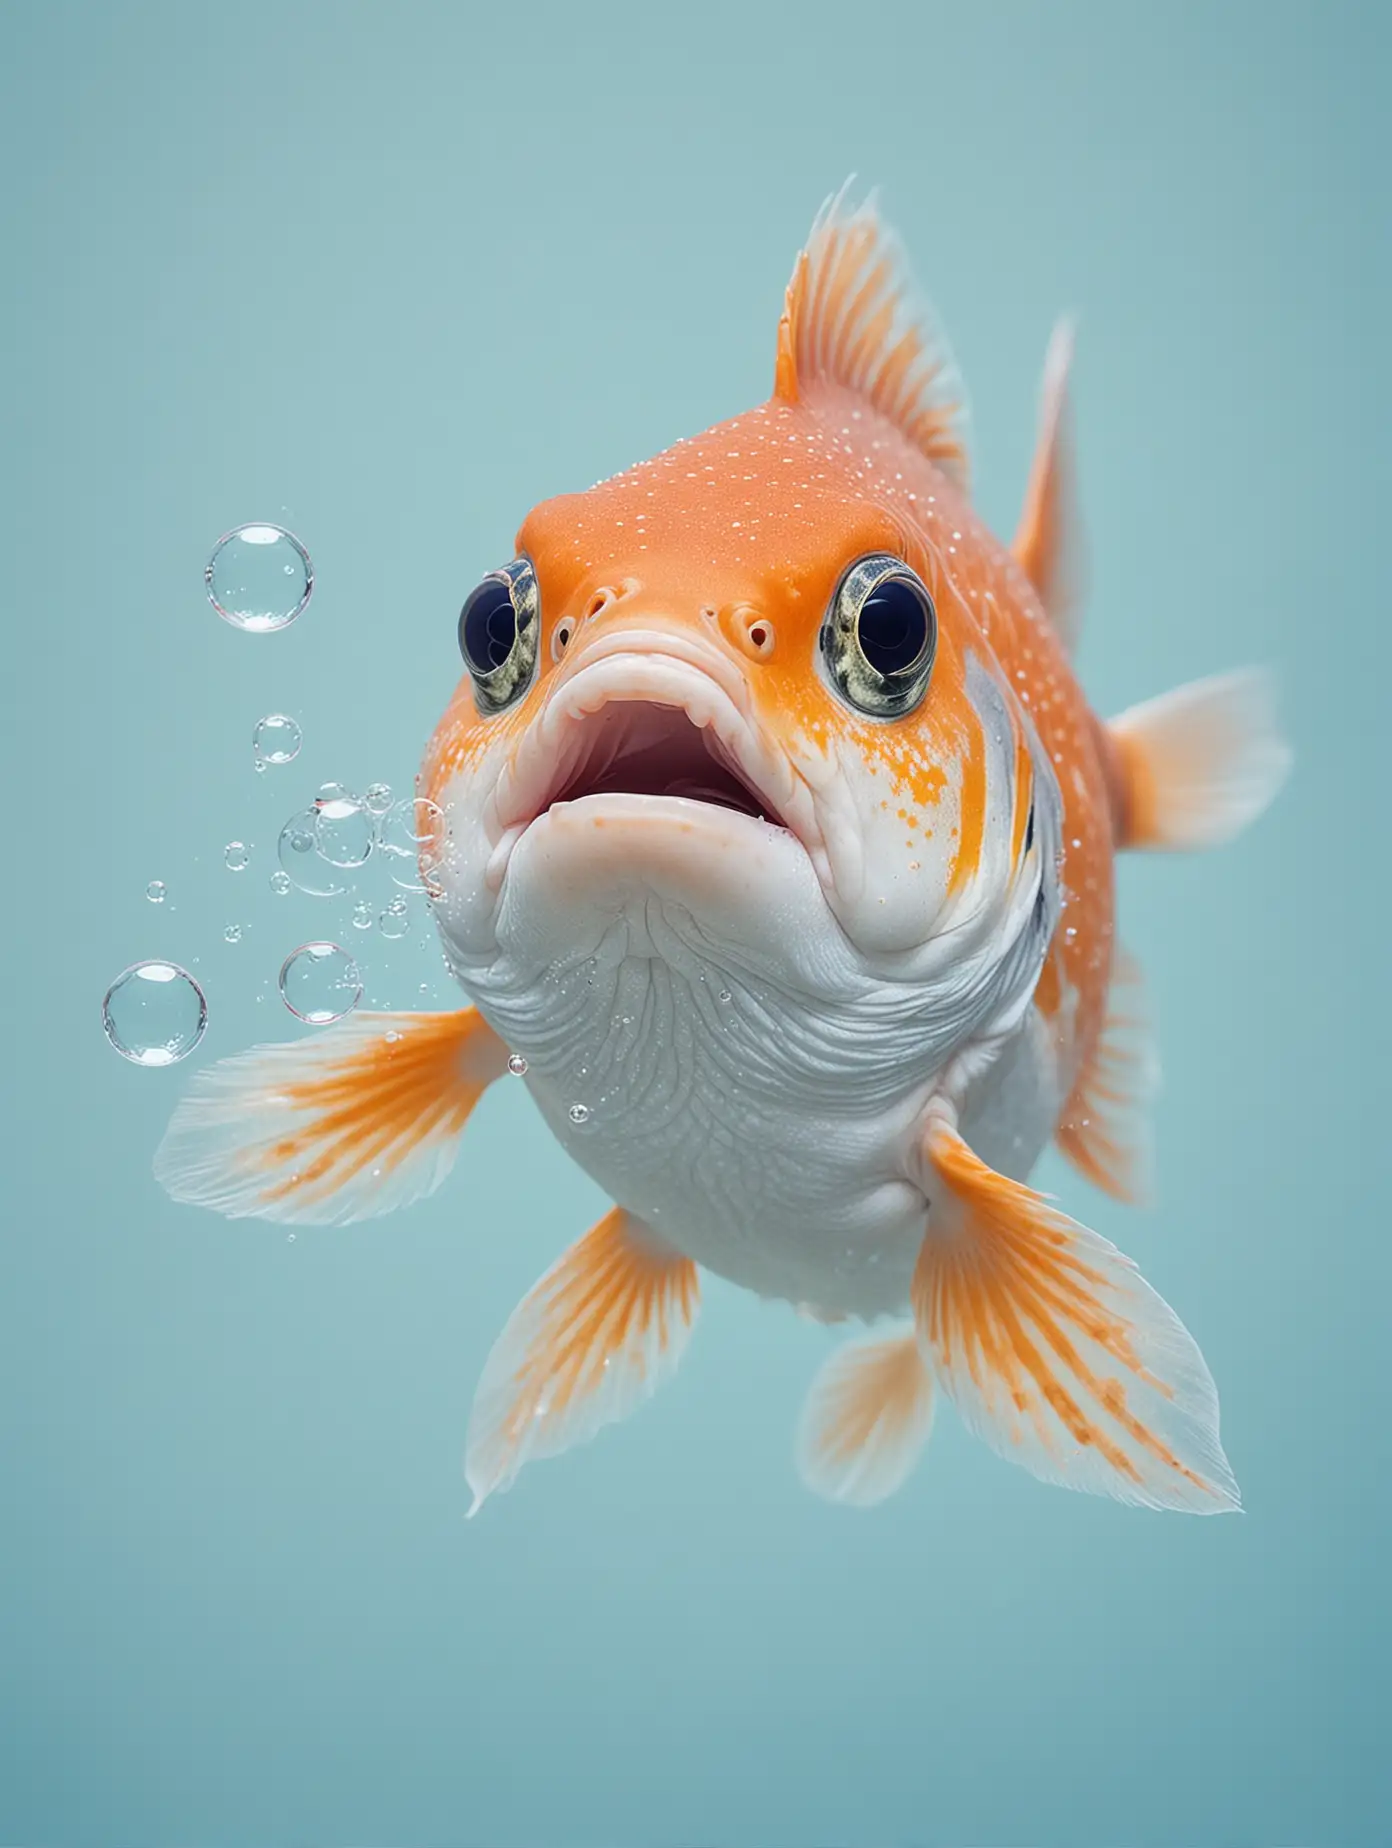 Cute Fish Blowing Bubbles on Light Blue Background